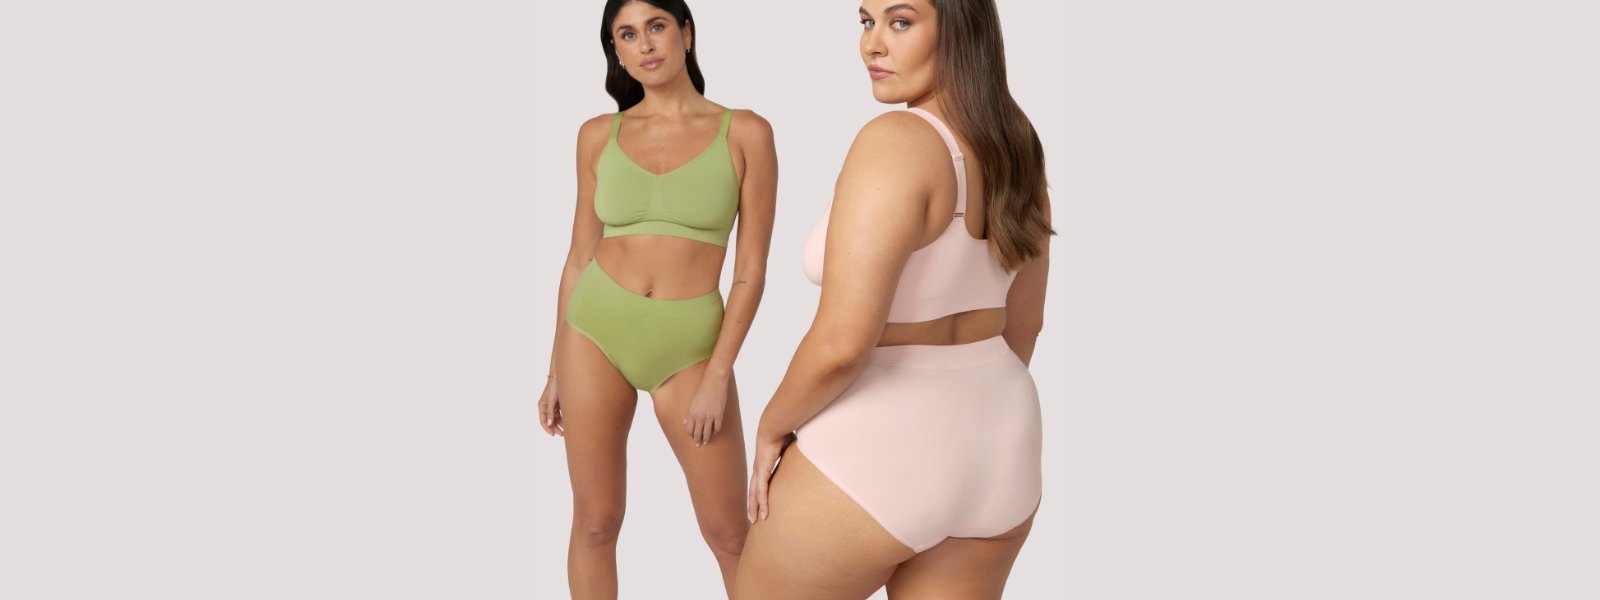 New underwear, wirefree bras, comfortable shapewear, breathable tops and pants | New Arrivals | Bella Bodies Latvia